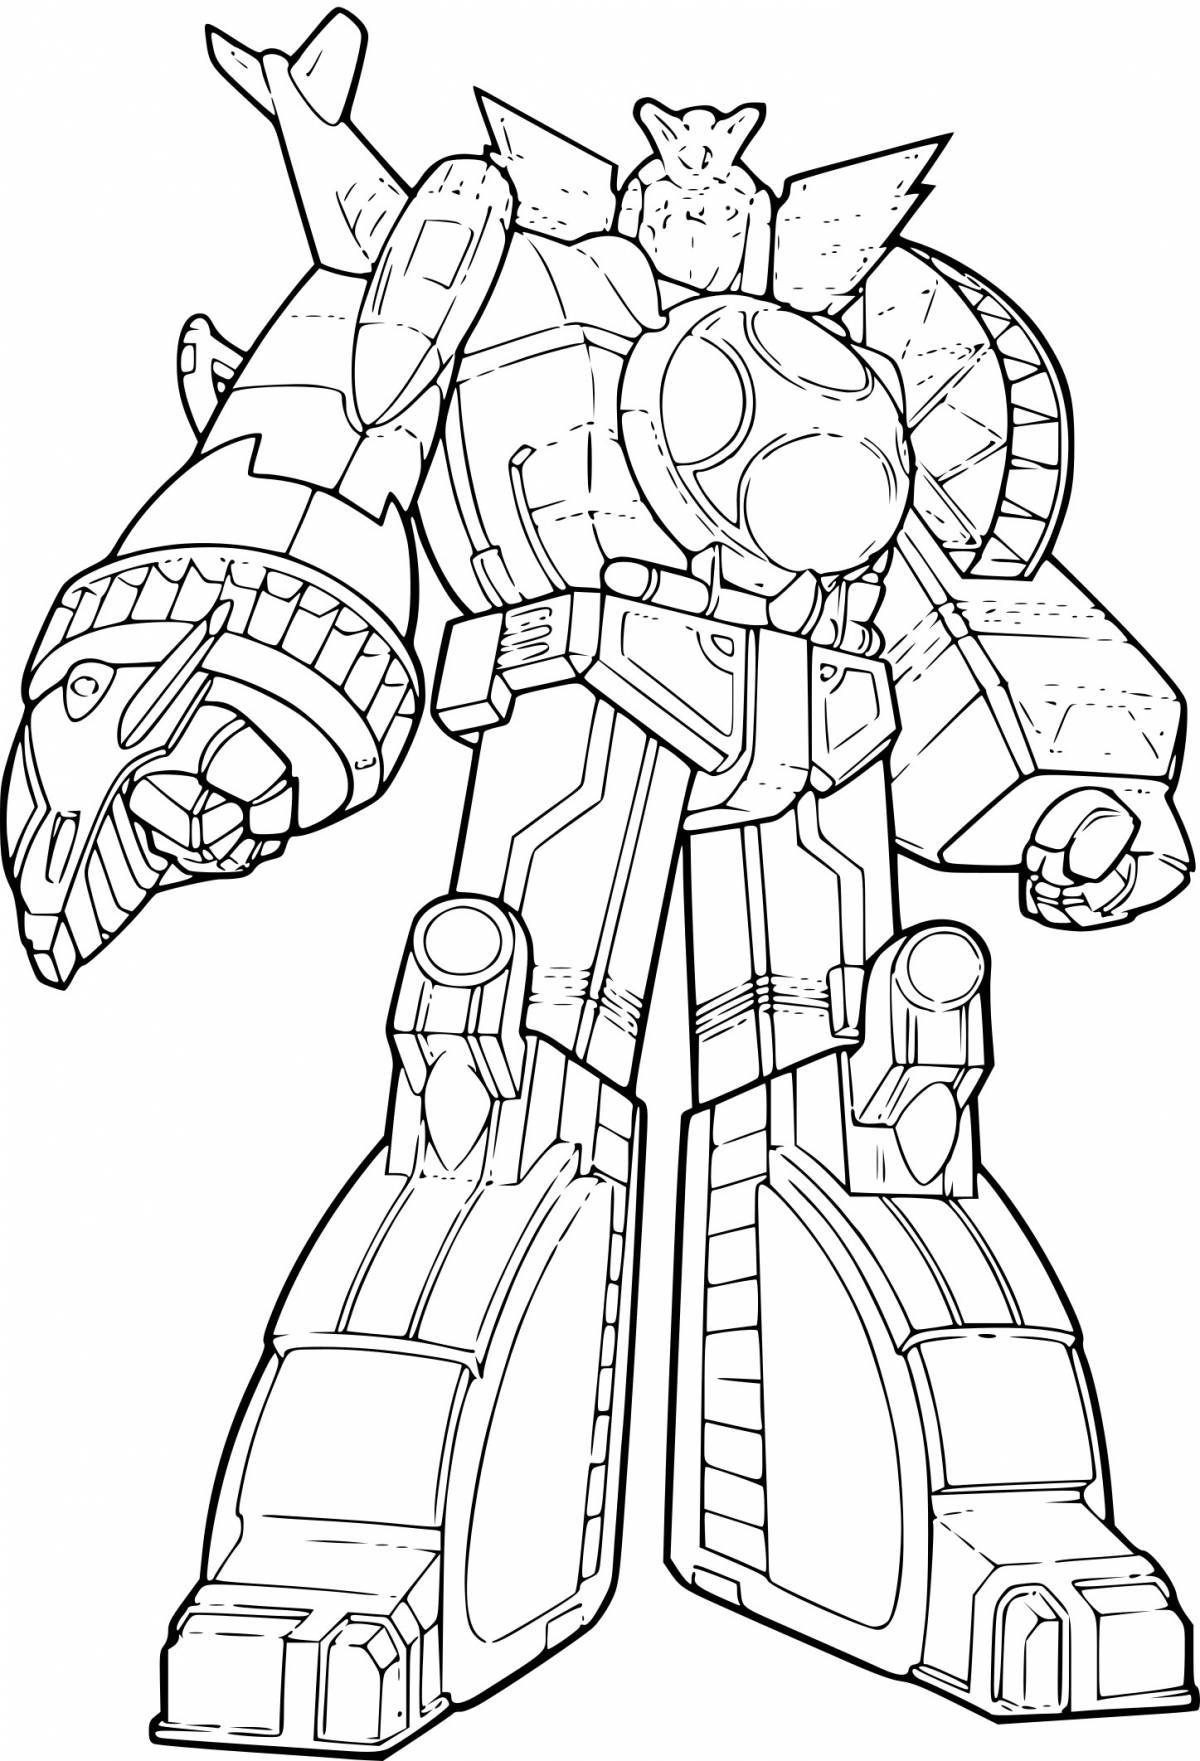 Fancy robot coloring pages for boys